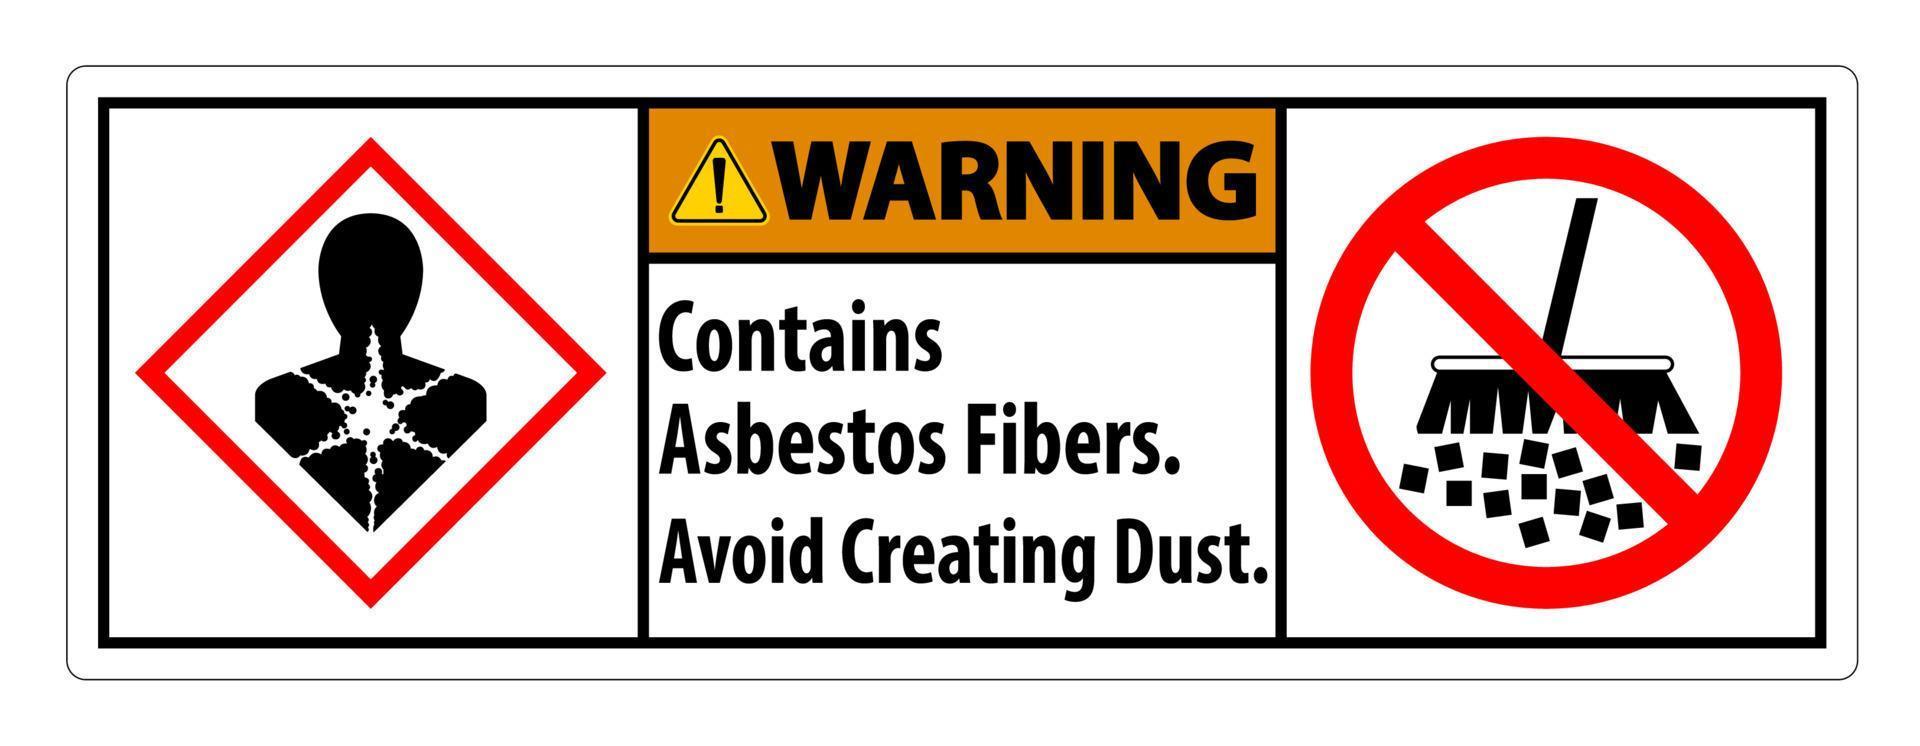 Warning Label Contains Asbestos Fibers,Avoid Creating Dust vector